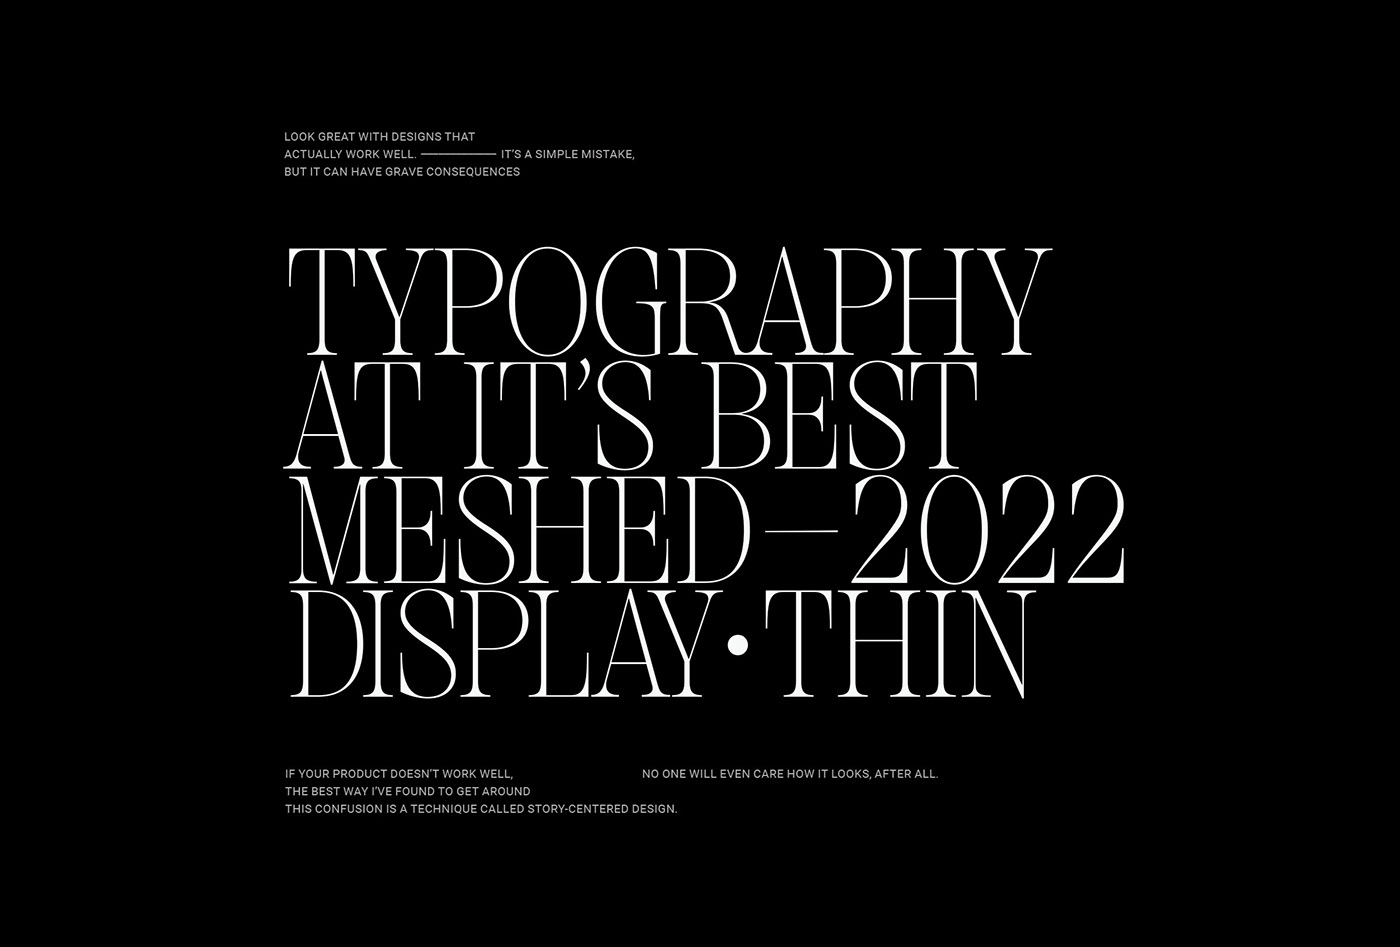 Display display font font lettering serif typeface  Typeface typeface design typography  